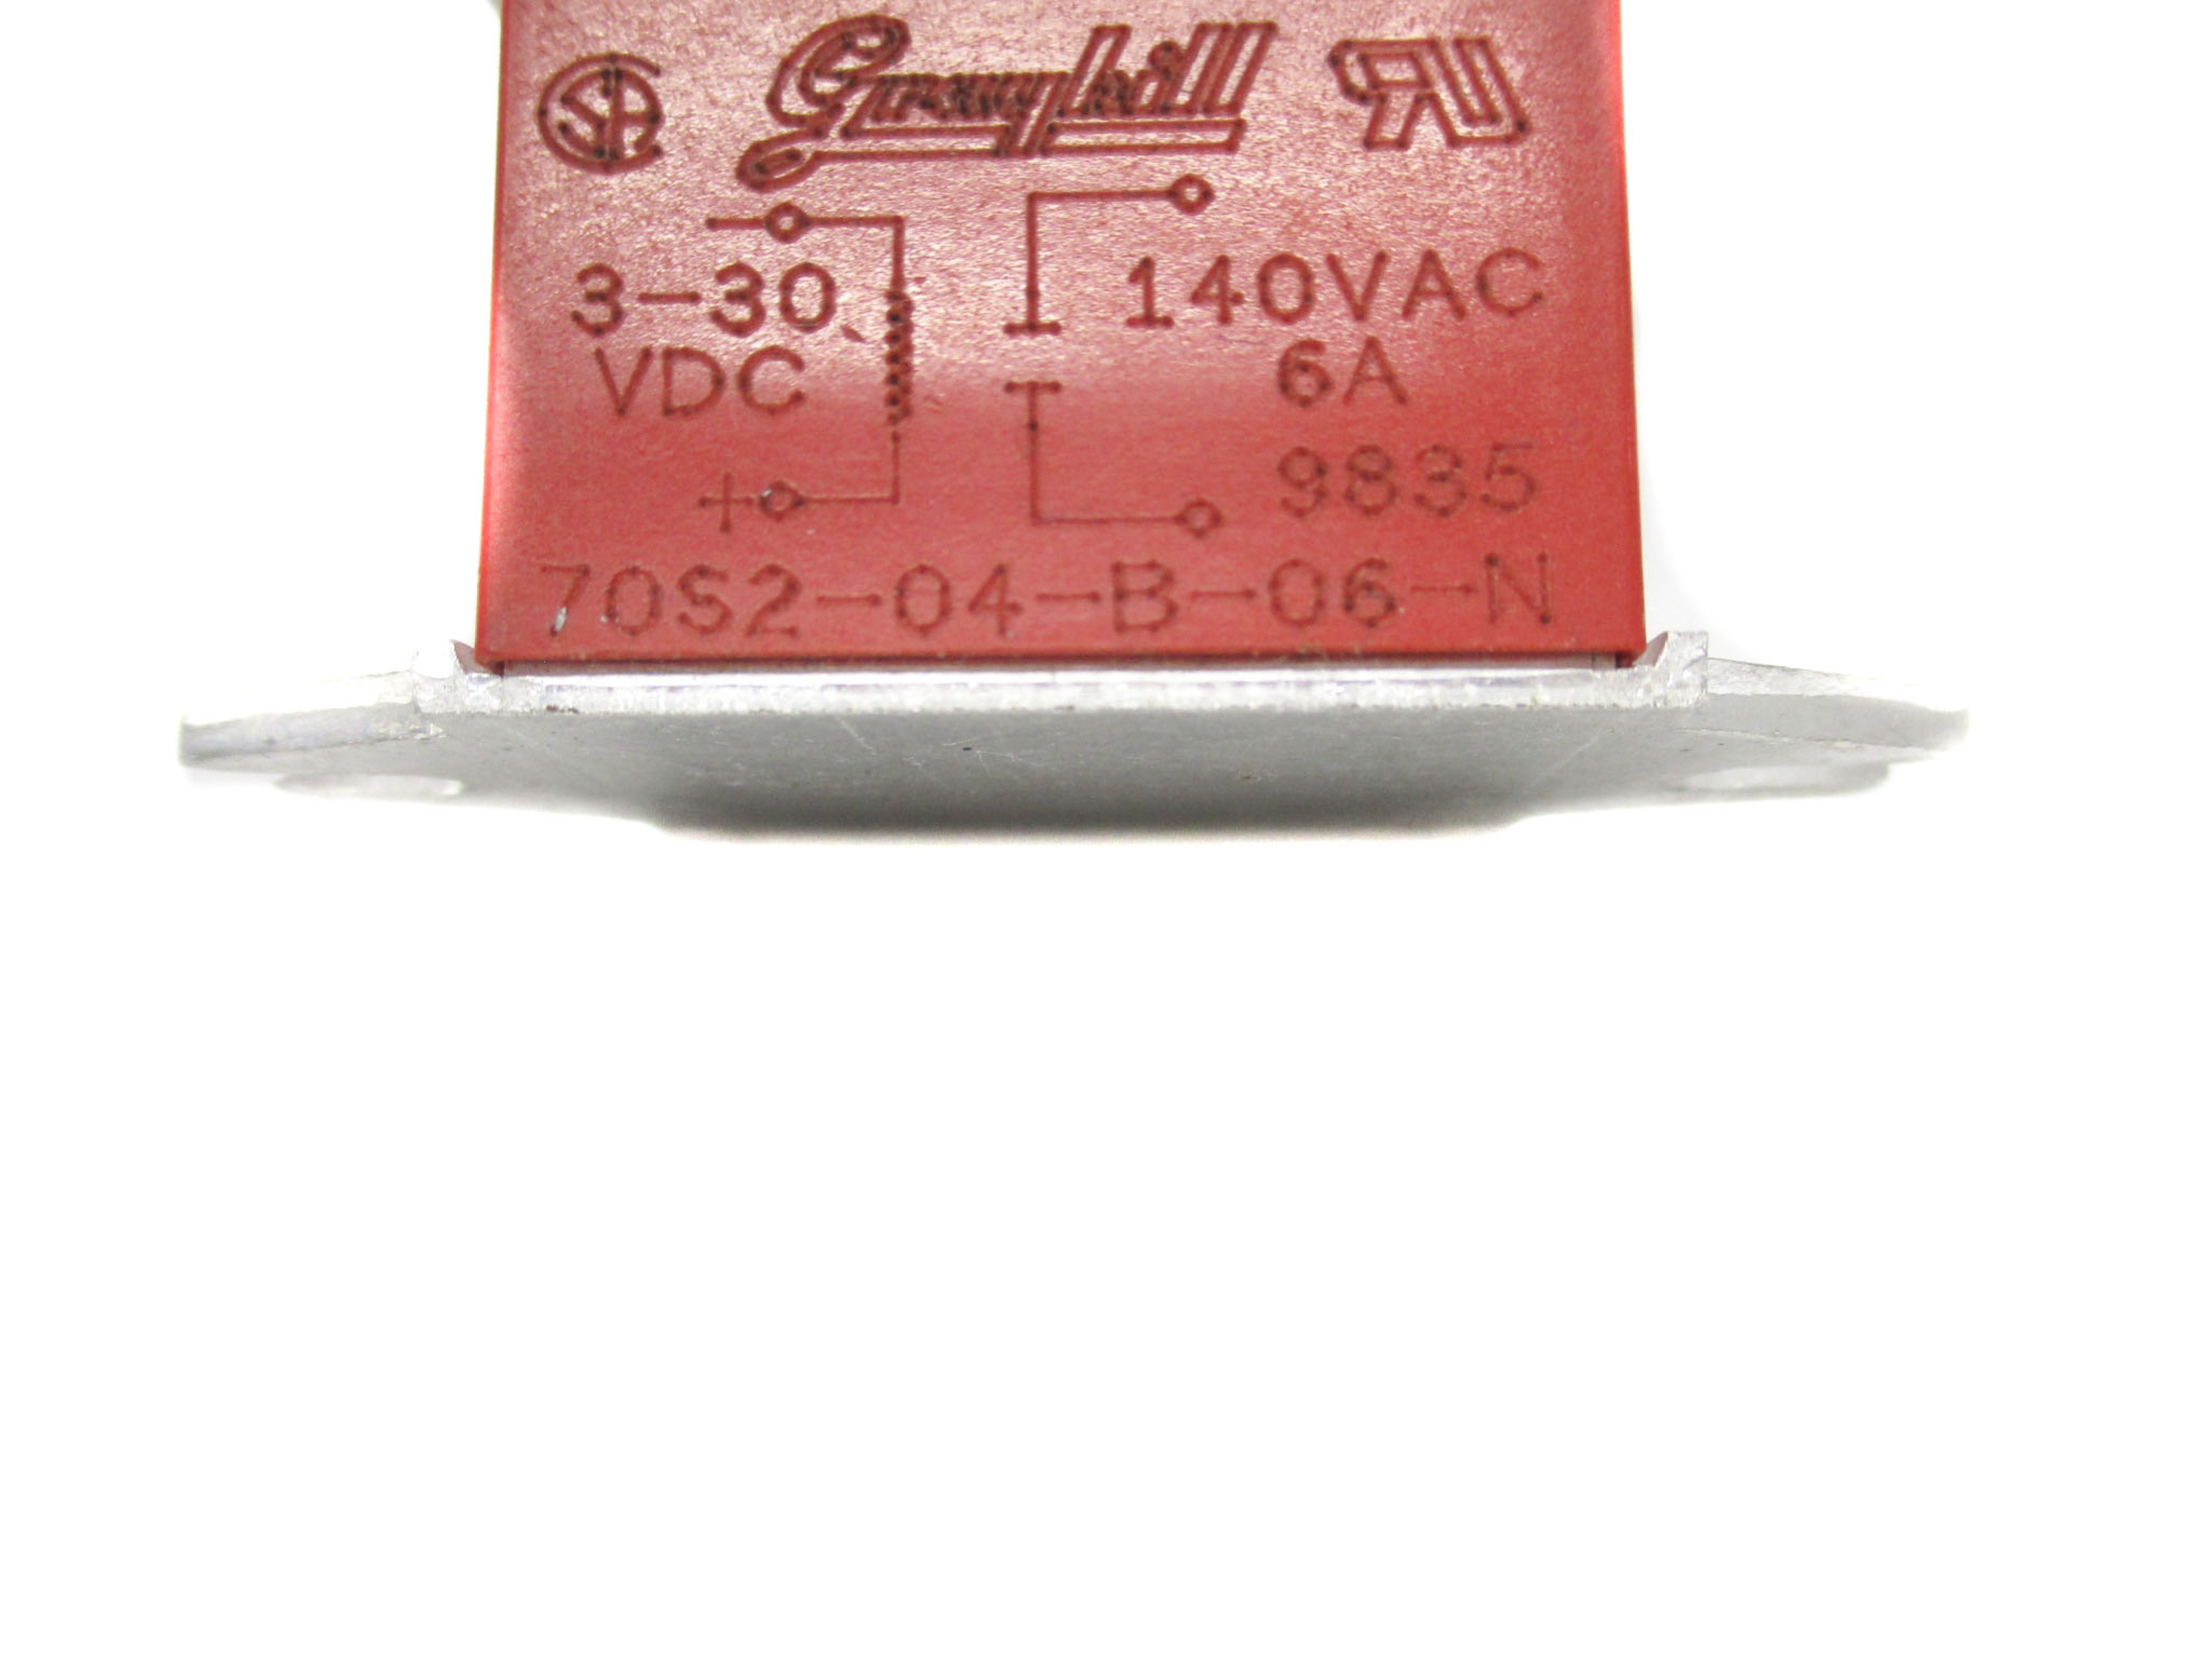 GRAYHILL SOLIDSTATE RELAY 70S2-04-B-06-N,3-30 VDC IN,140 VAC X 6 AMPS OUT 